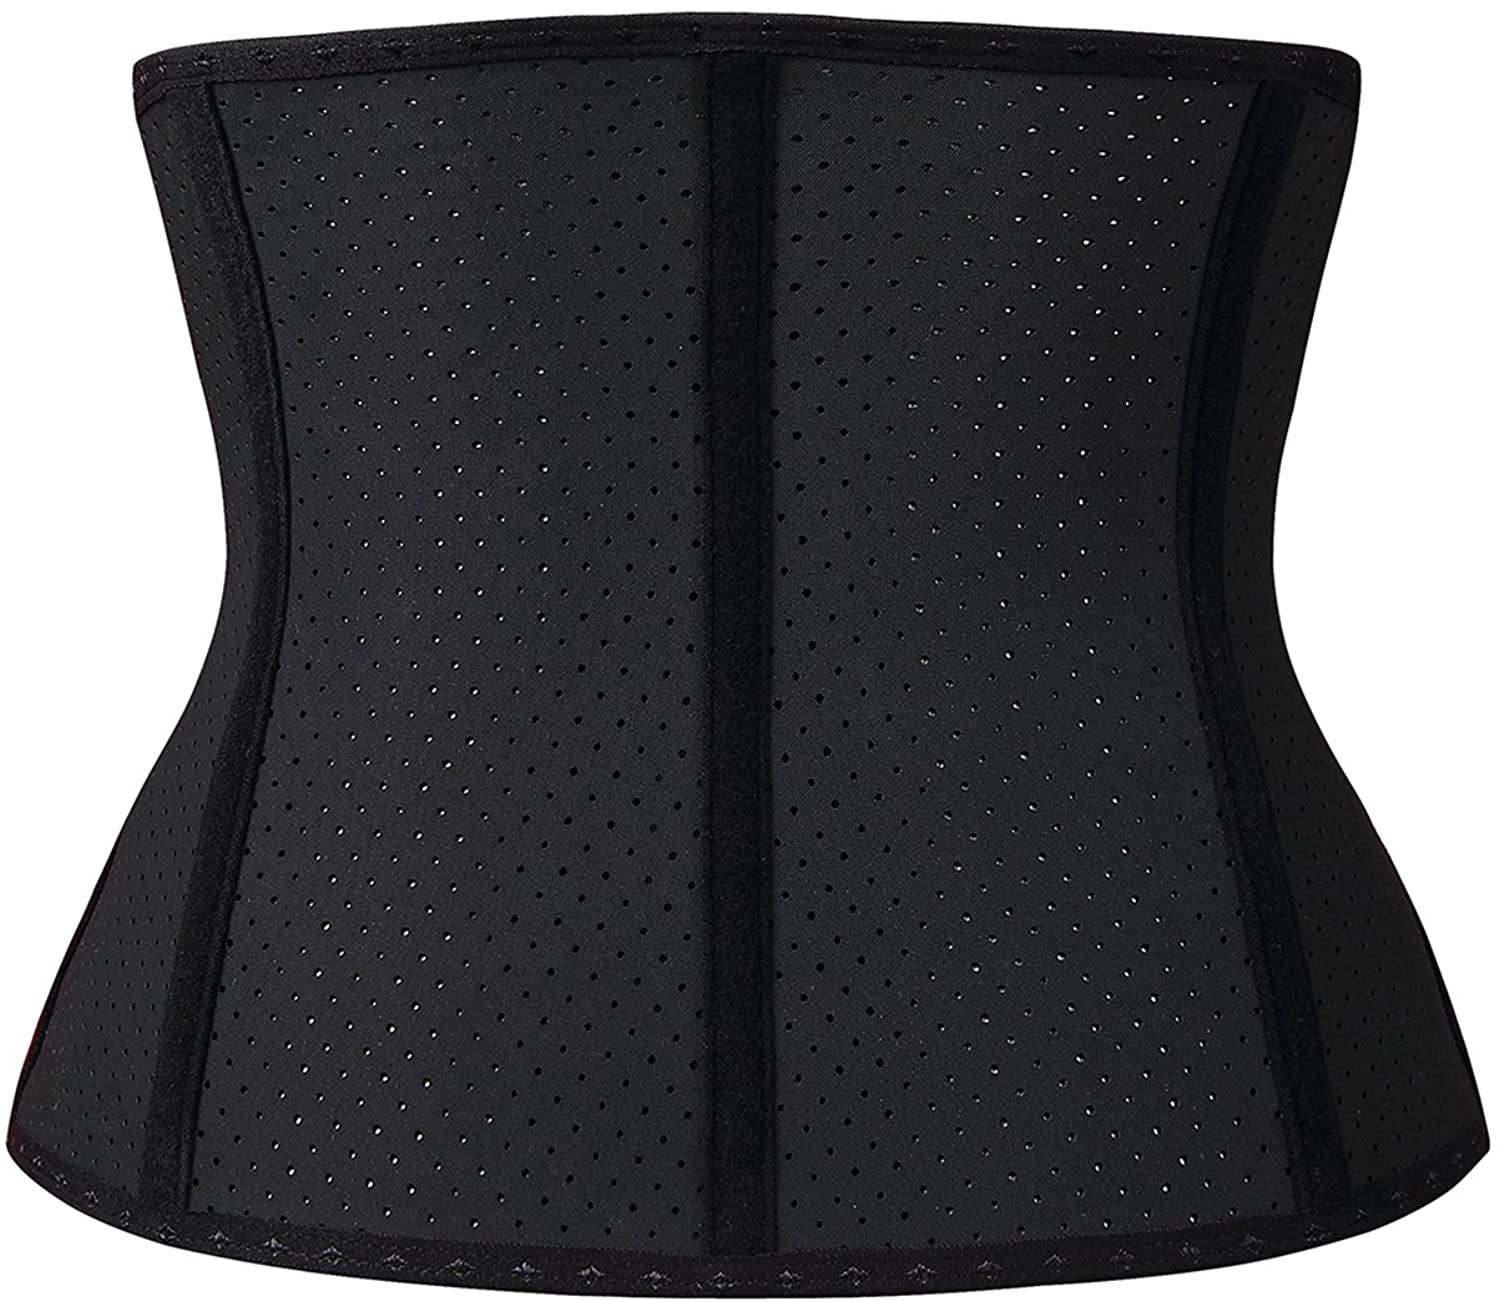 YIANNA Body MAGIC - Waist trainer Corset for  perfect hourglass Body. - e4cents